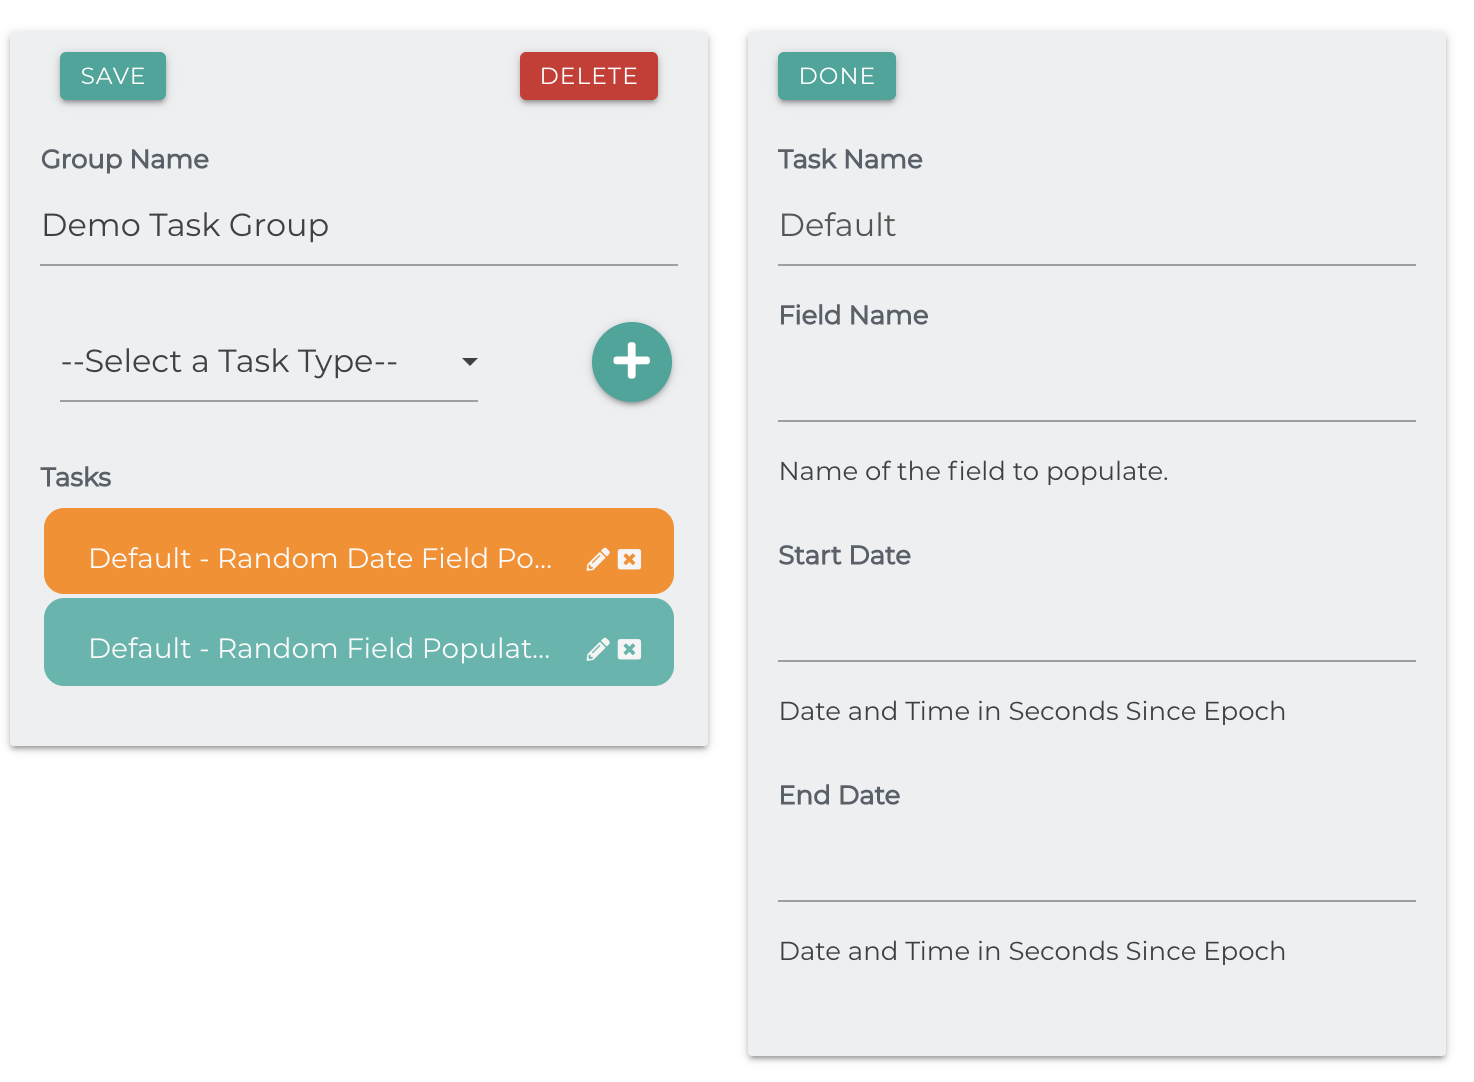 Add Tasks to Task Group